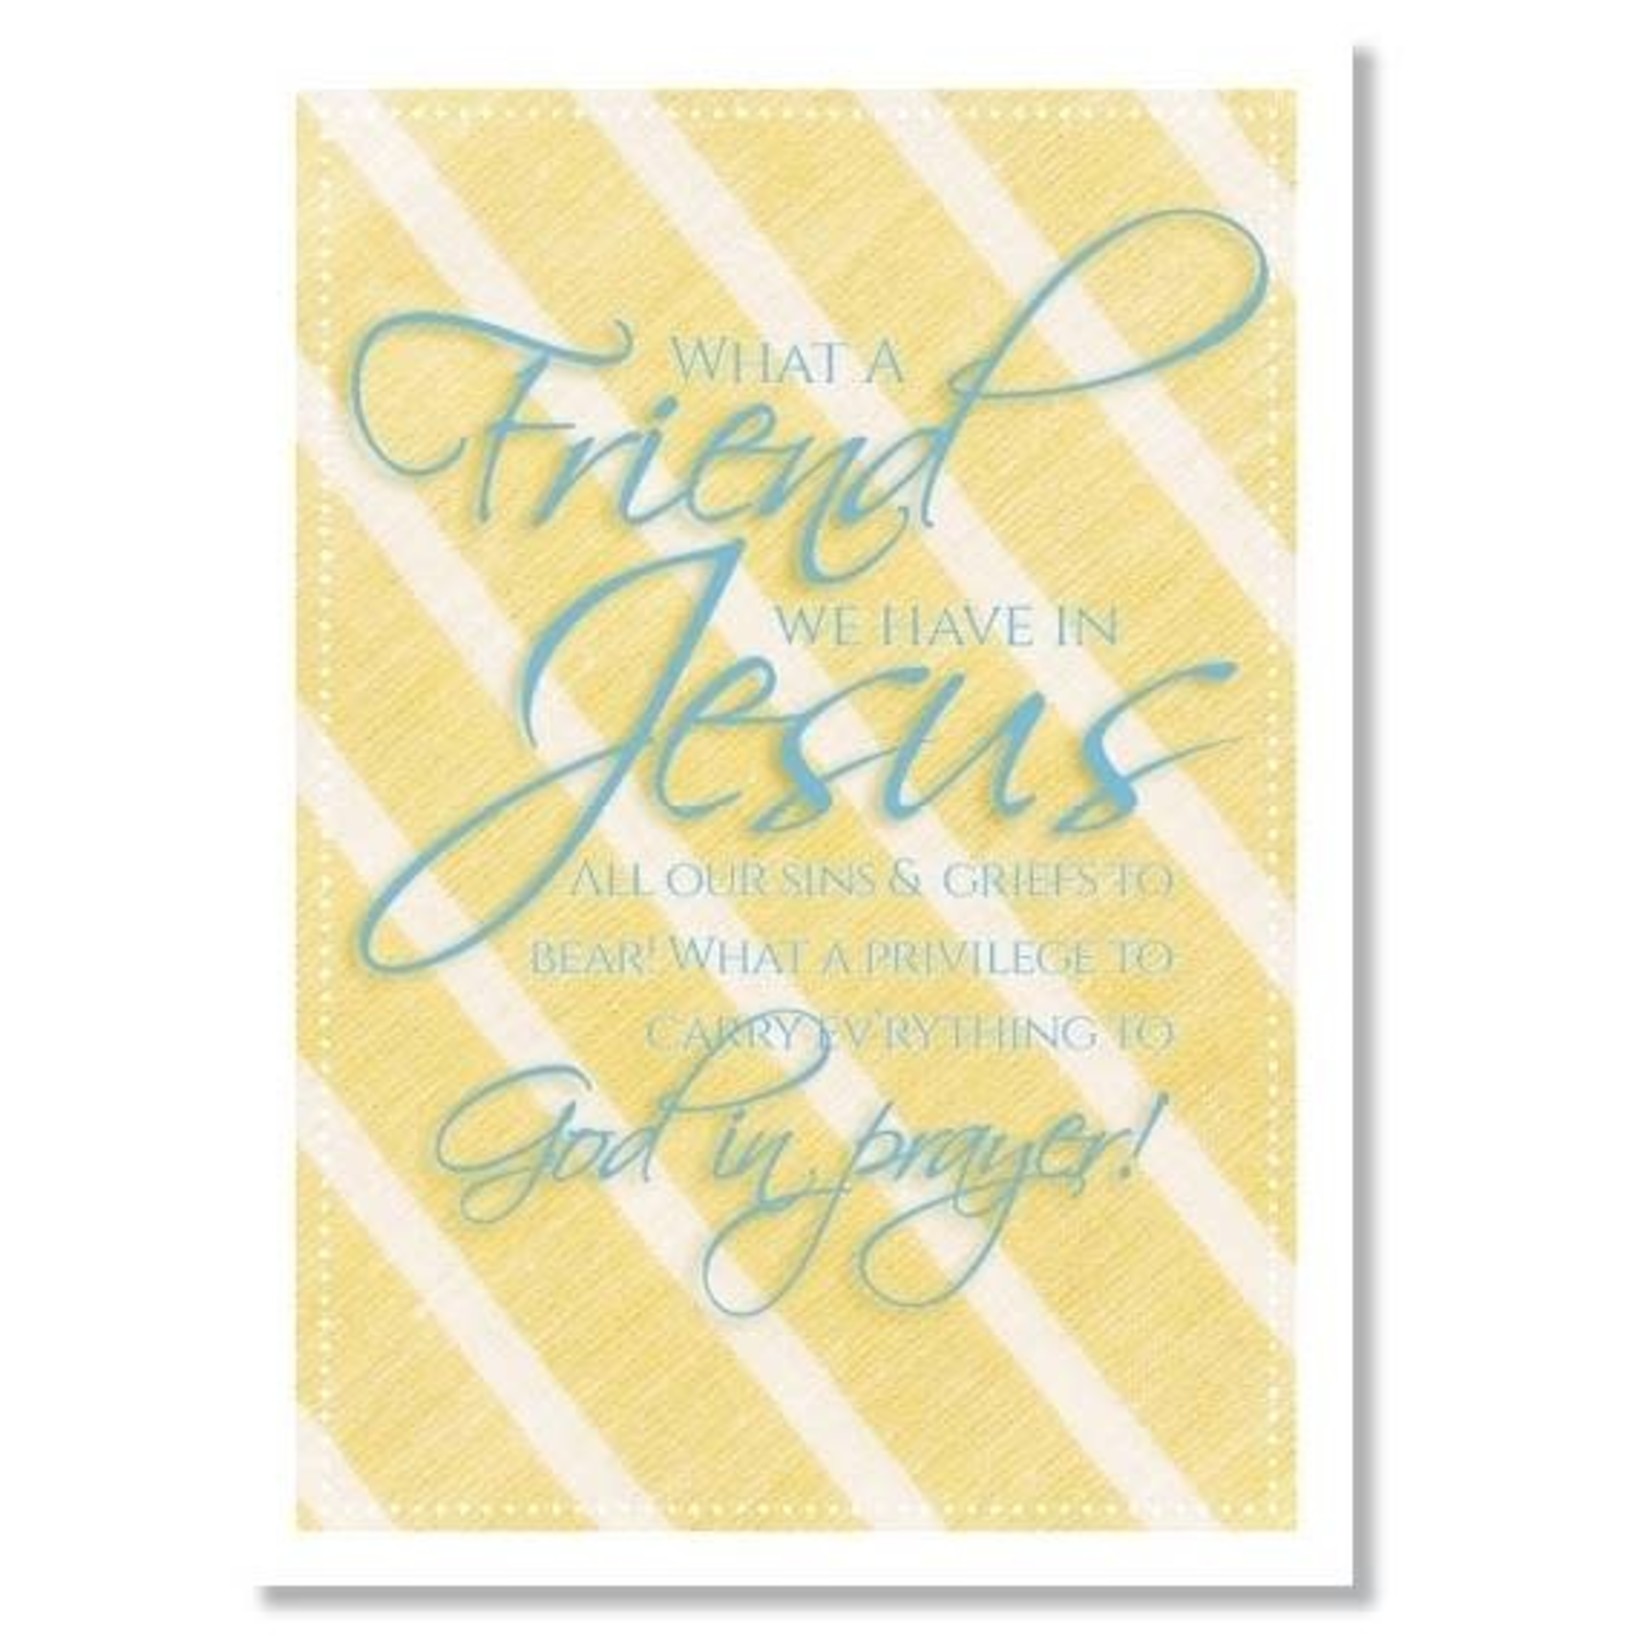 Hymns In My Heart - 5x7" Greeting Card - Sister In Christ - What a Friend We Have in Jesus